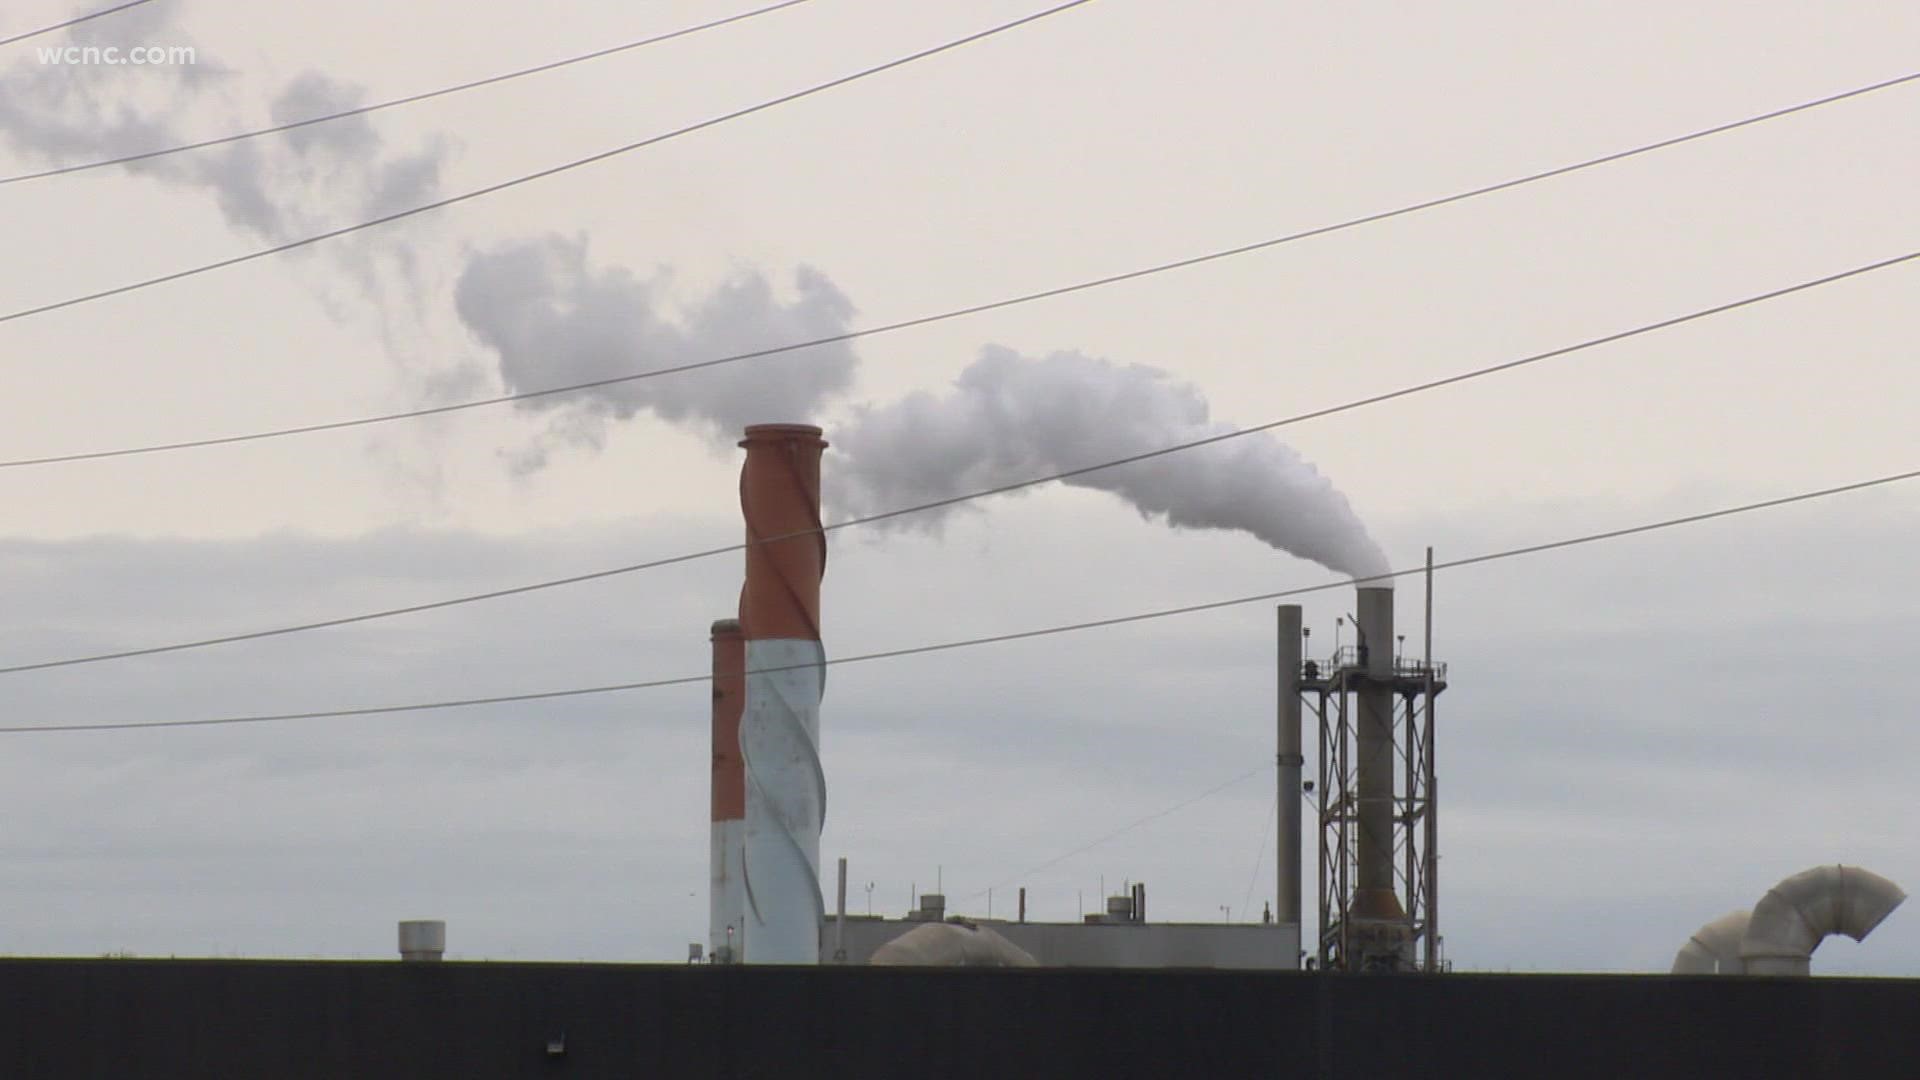 The South Carolina paper mill accused of releasing harmful chemicals into the air affecting thousands of homeowners could end up paying a $1.1 million fine.